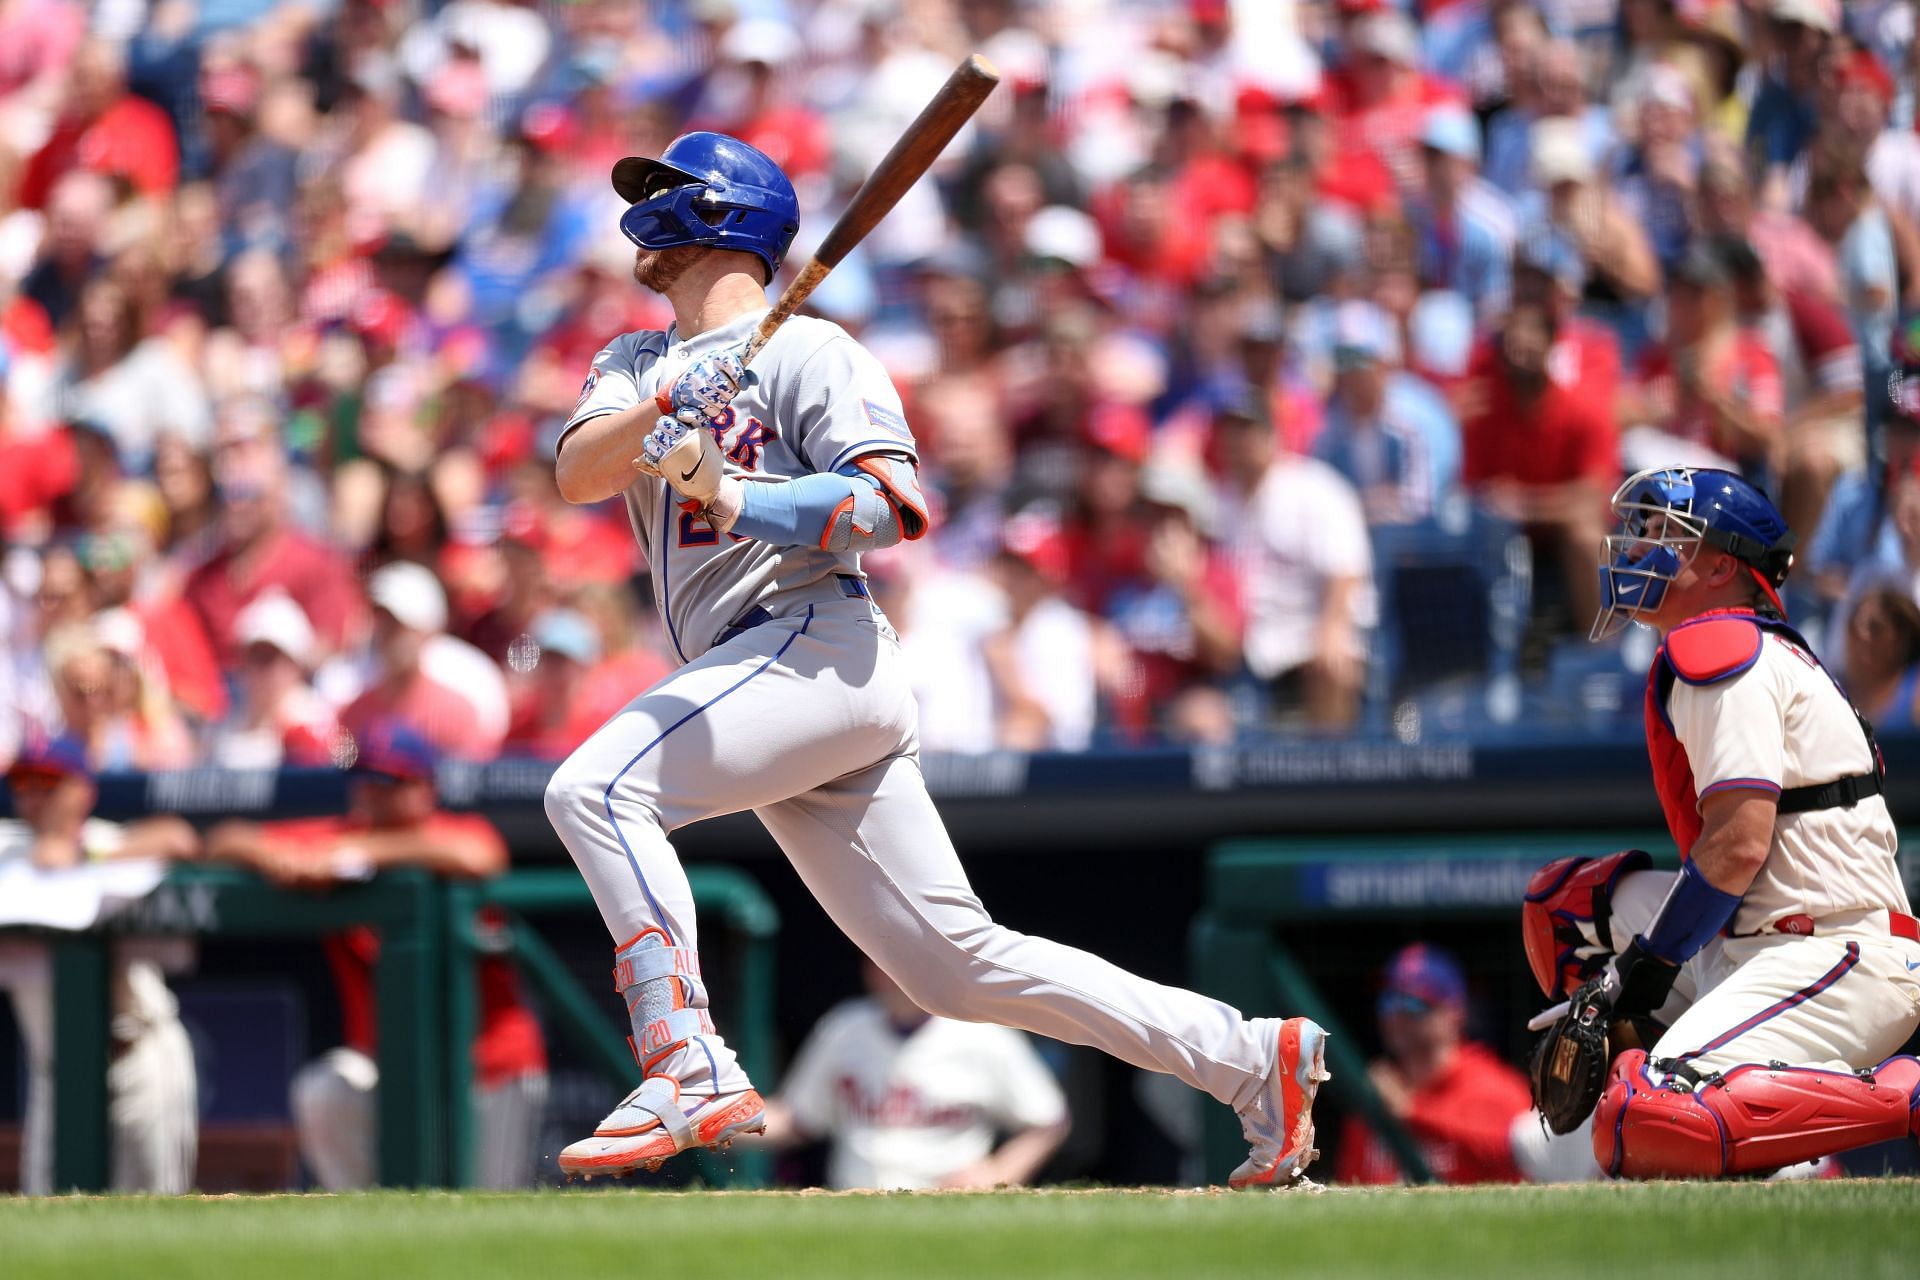 Can Pete Alonso win the Home Run derby?